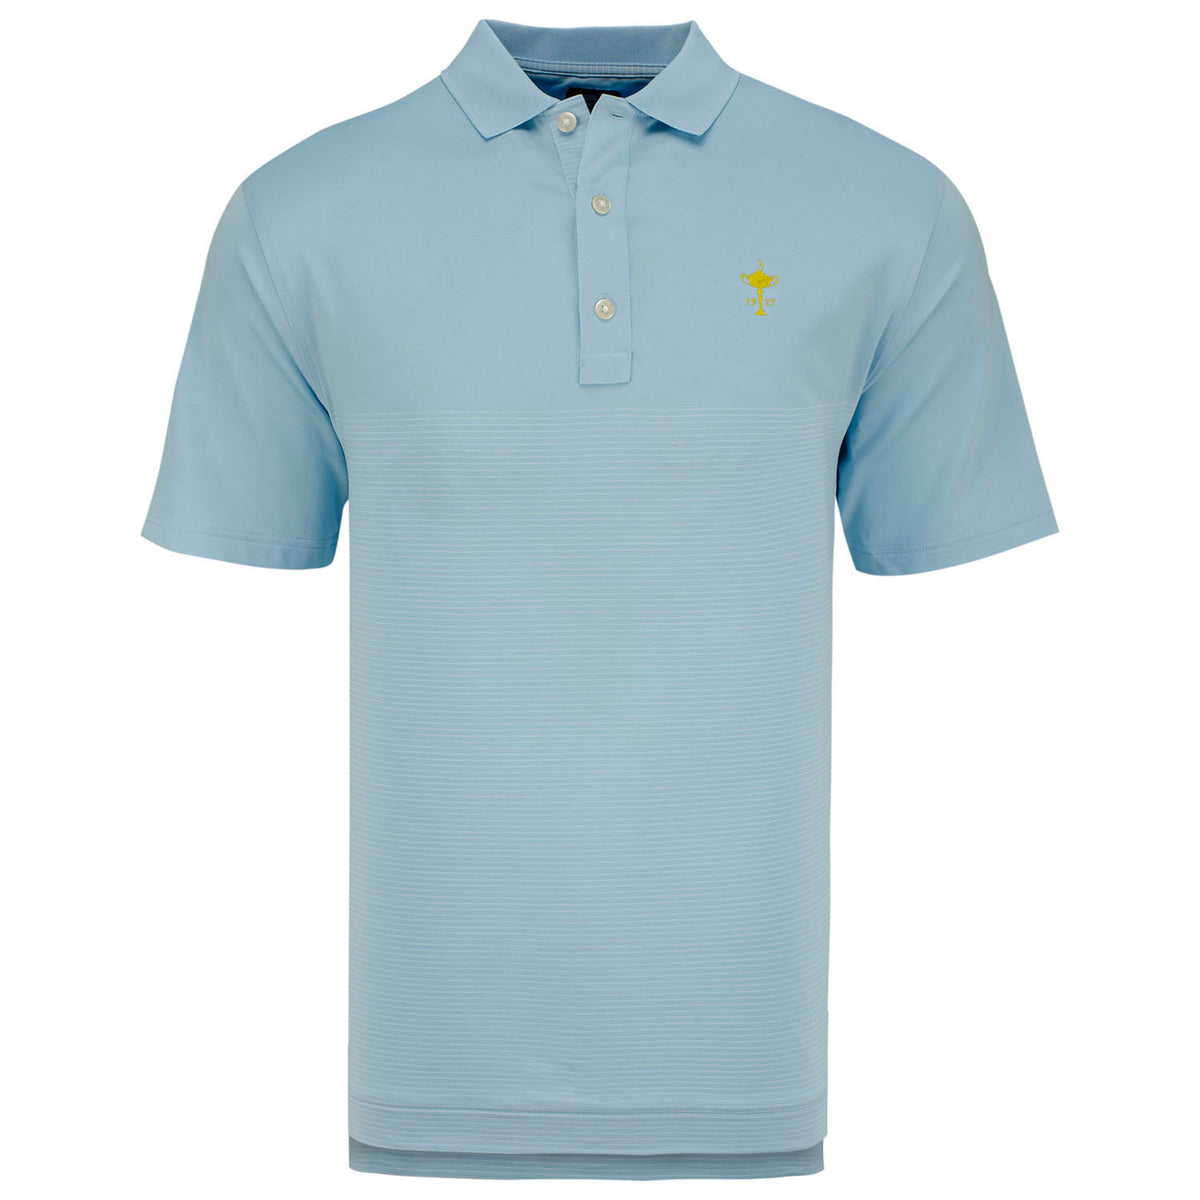 Ryder Cup FootJoy Engineered Pin Stripe Polo in Blue- Front View